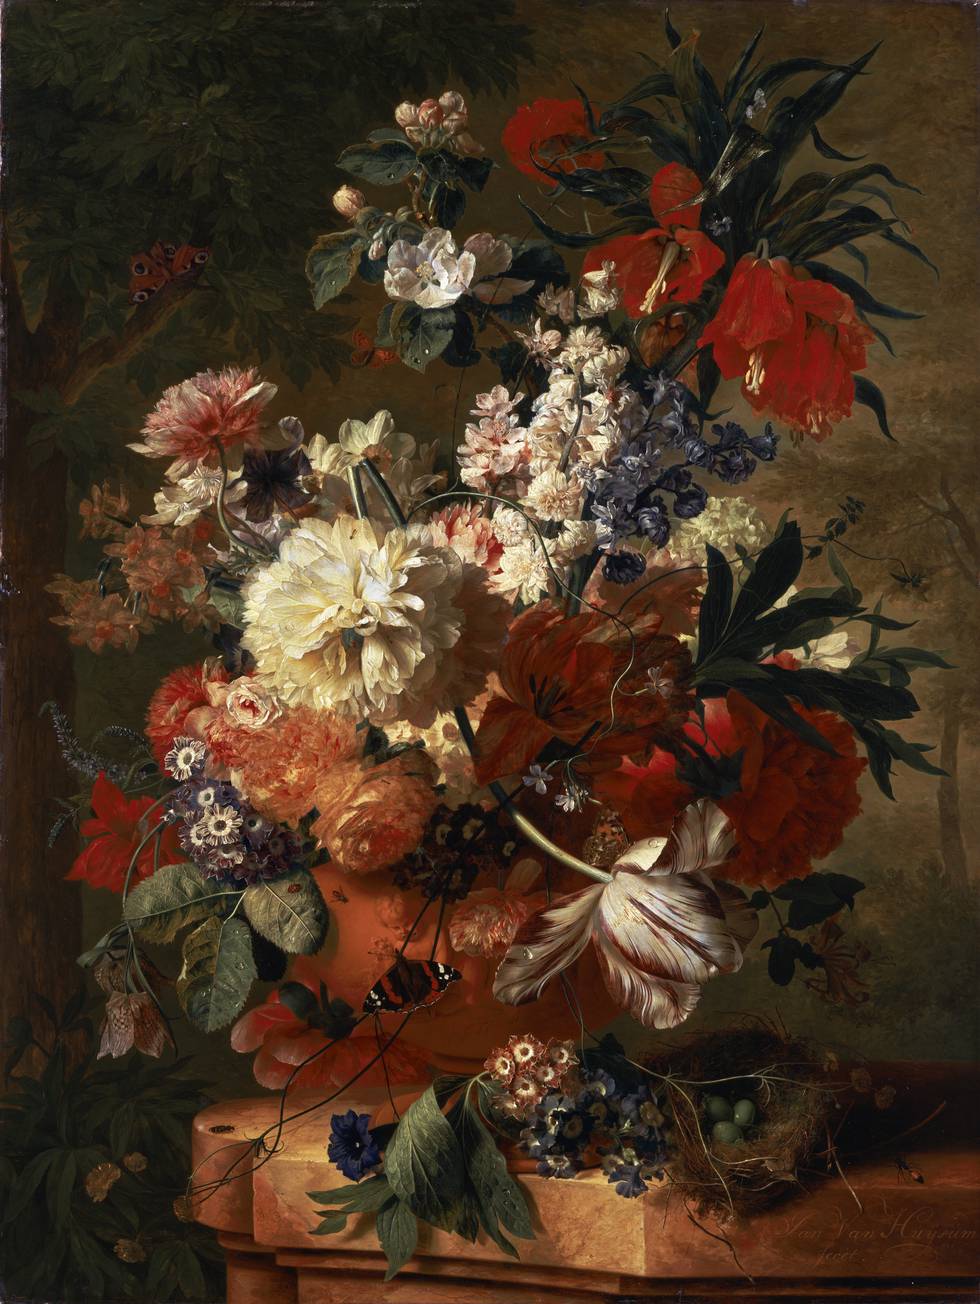 A painting of a vase of flowers